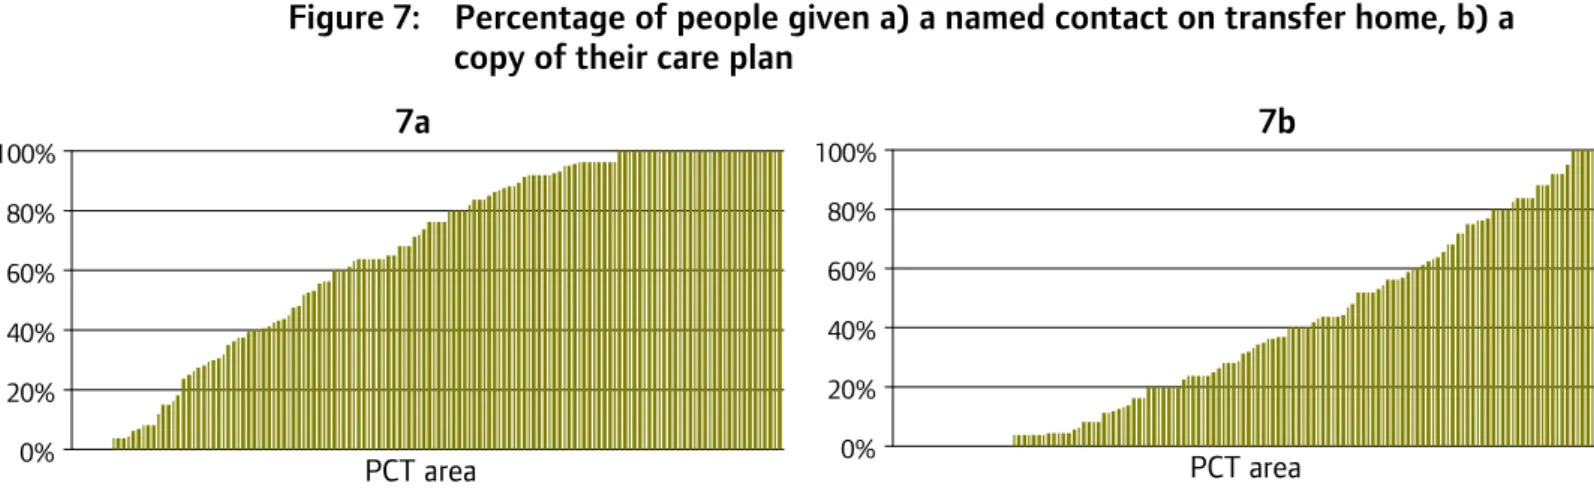 Figure 7:  Percentage of people given a) a named contact on transfer home, b) a  copy of their care plan 